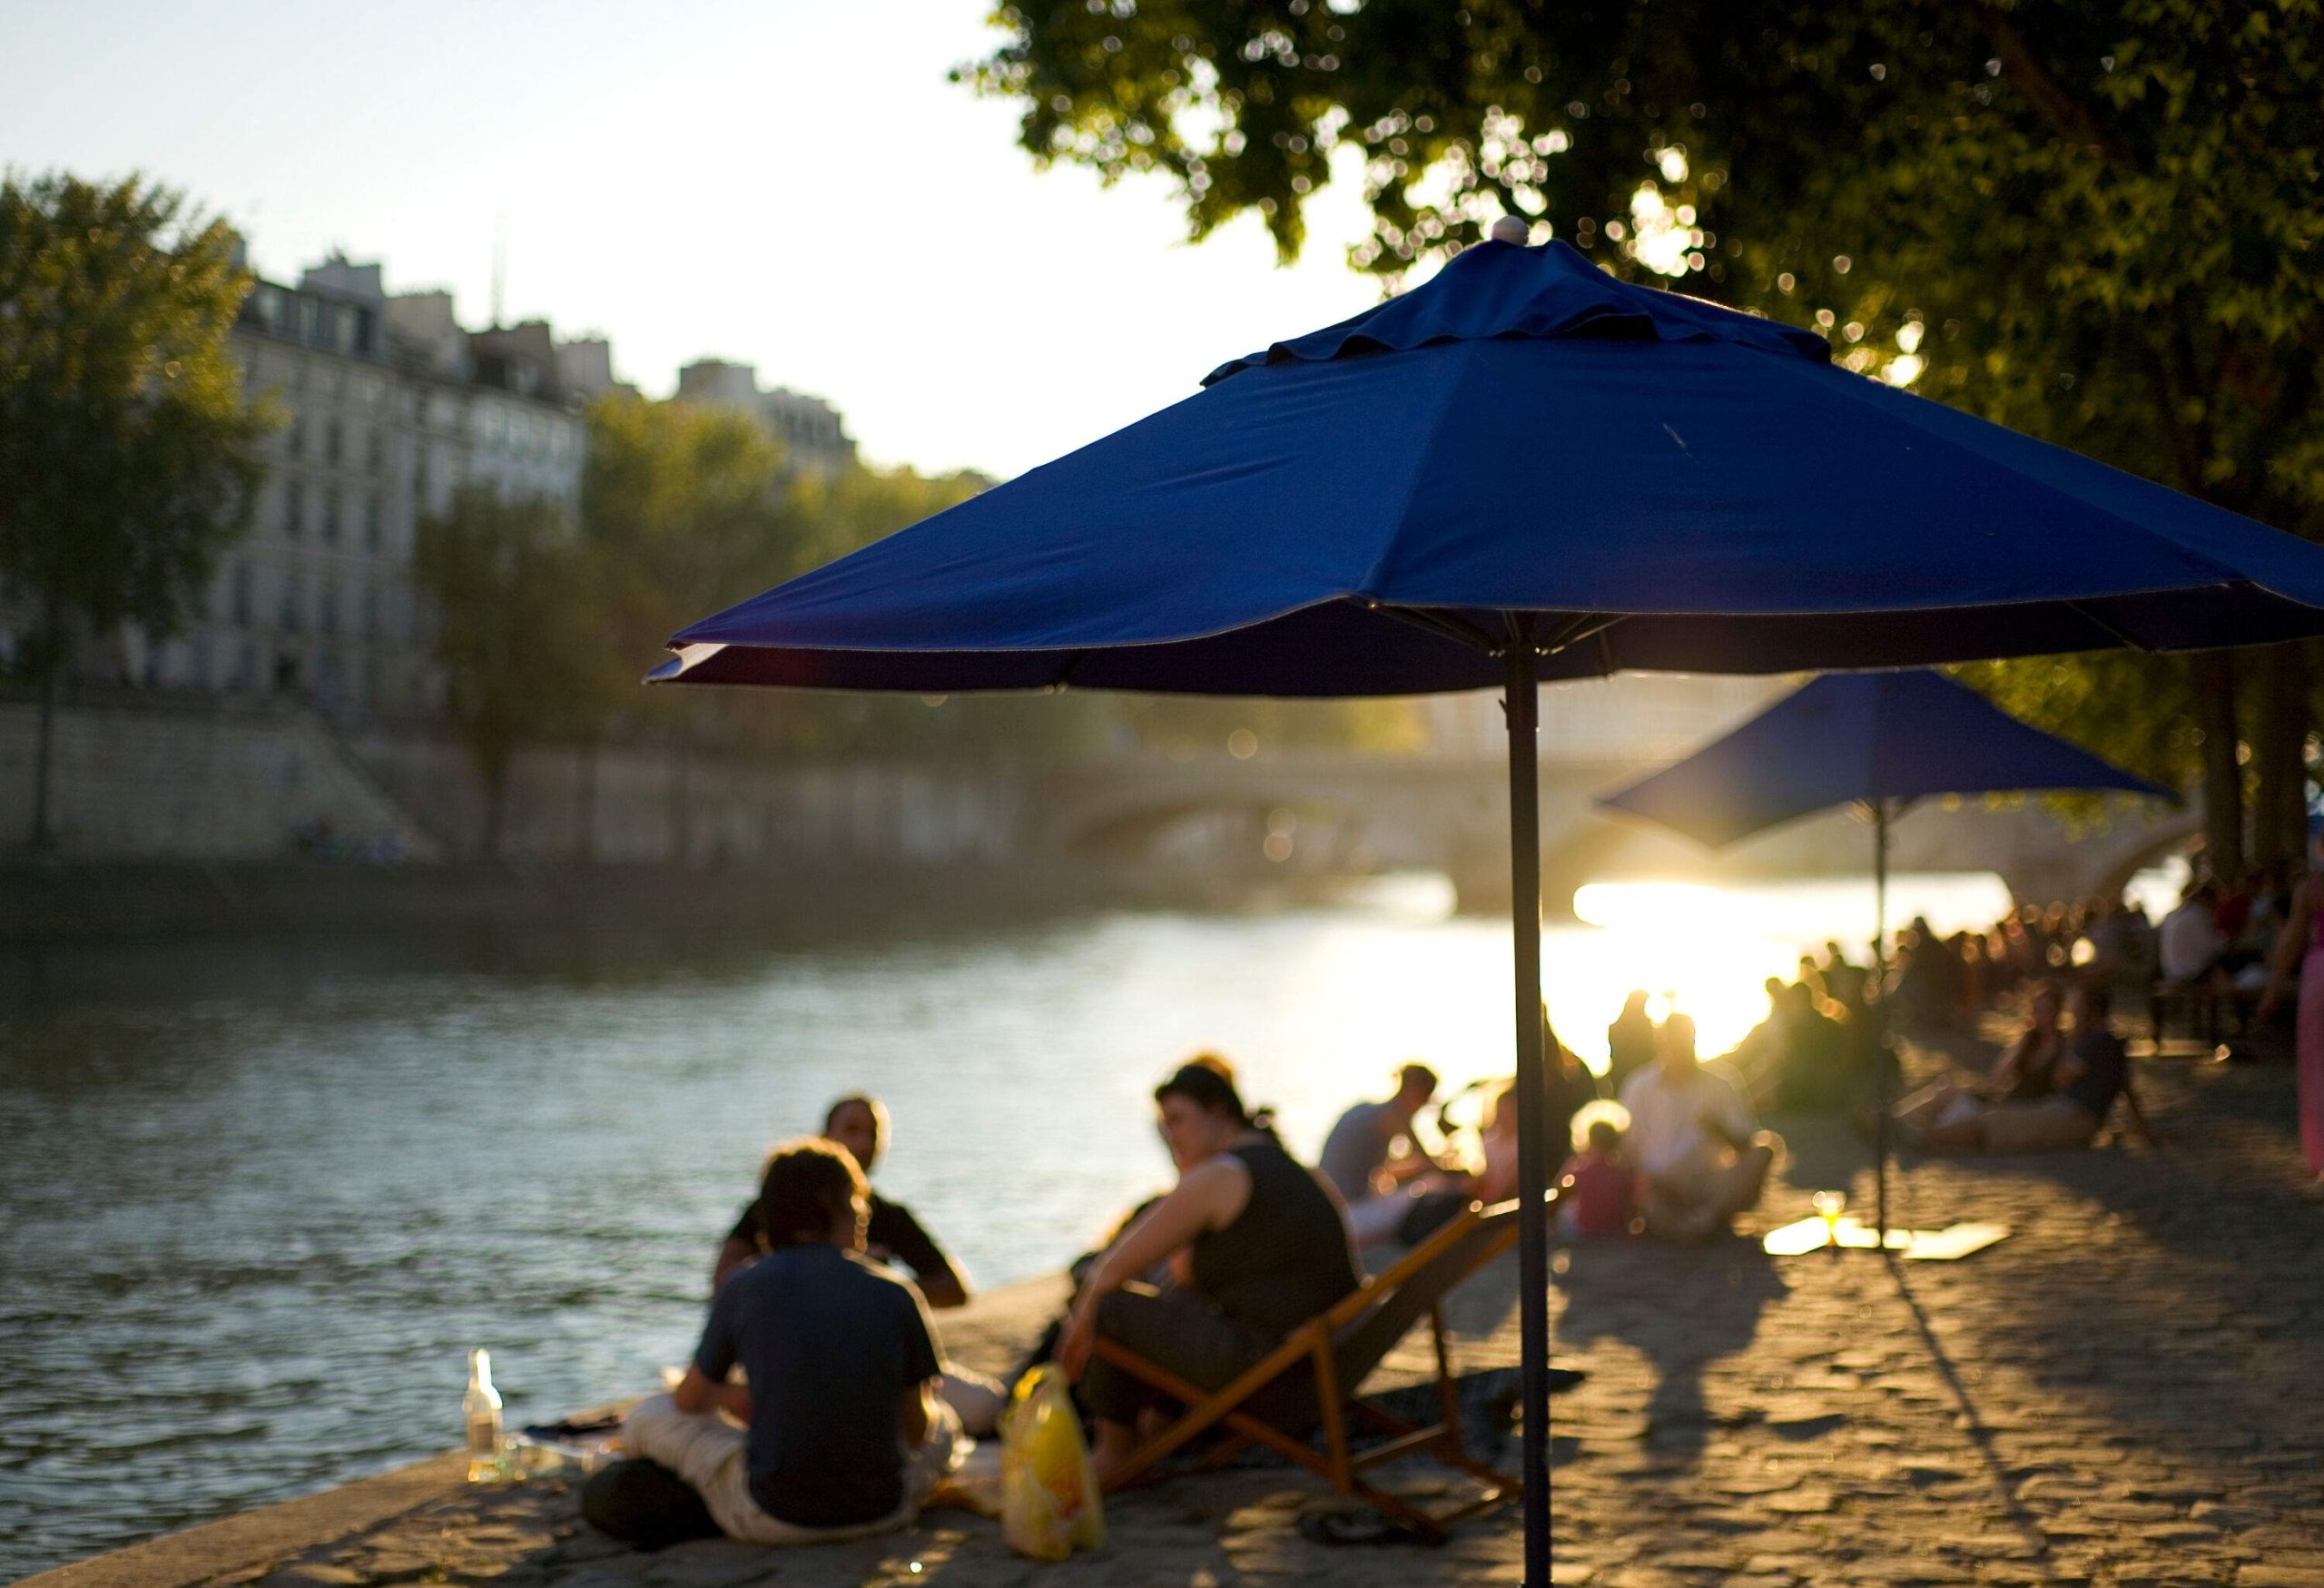 Bokeh of people sitting under blue umbrellas by the river bank.